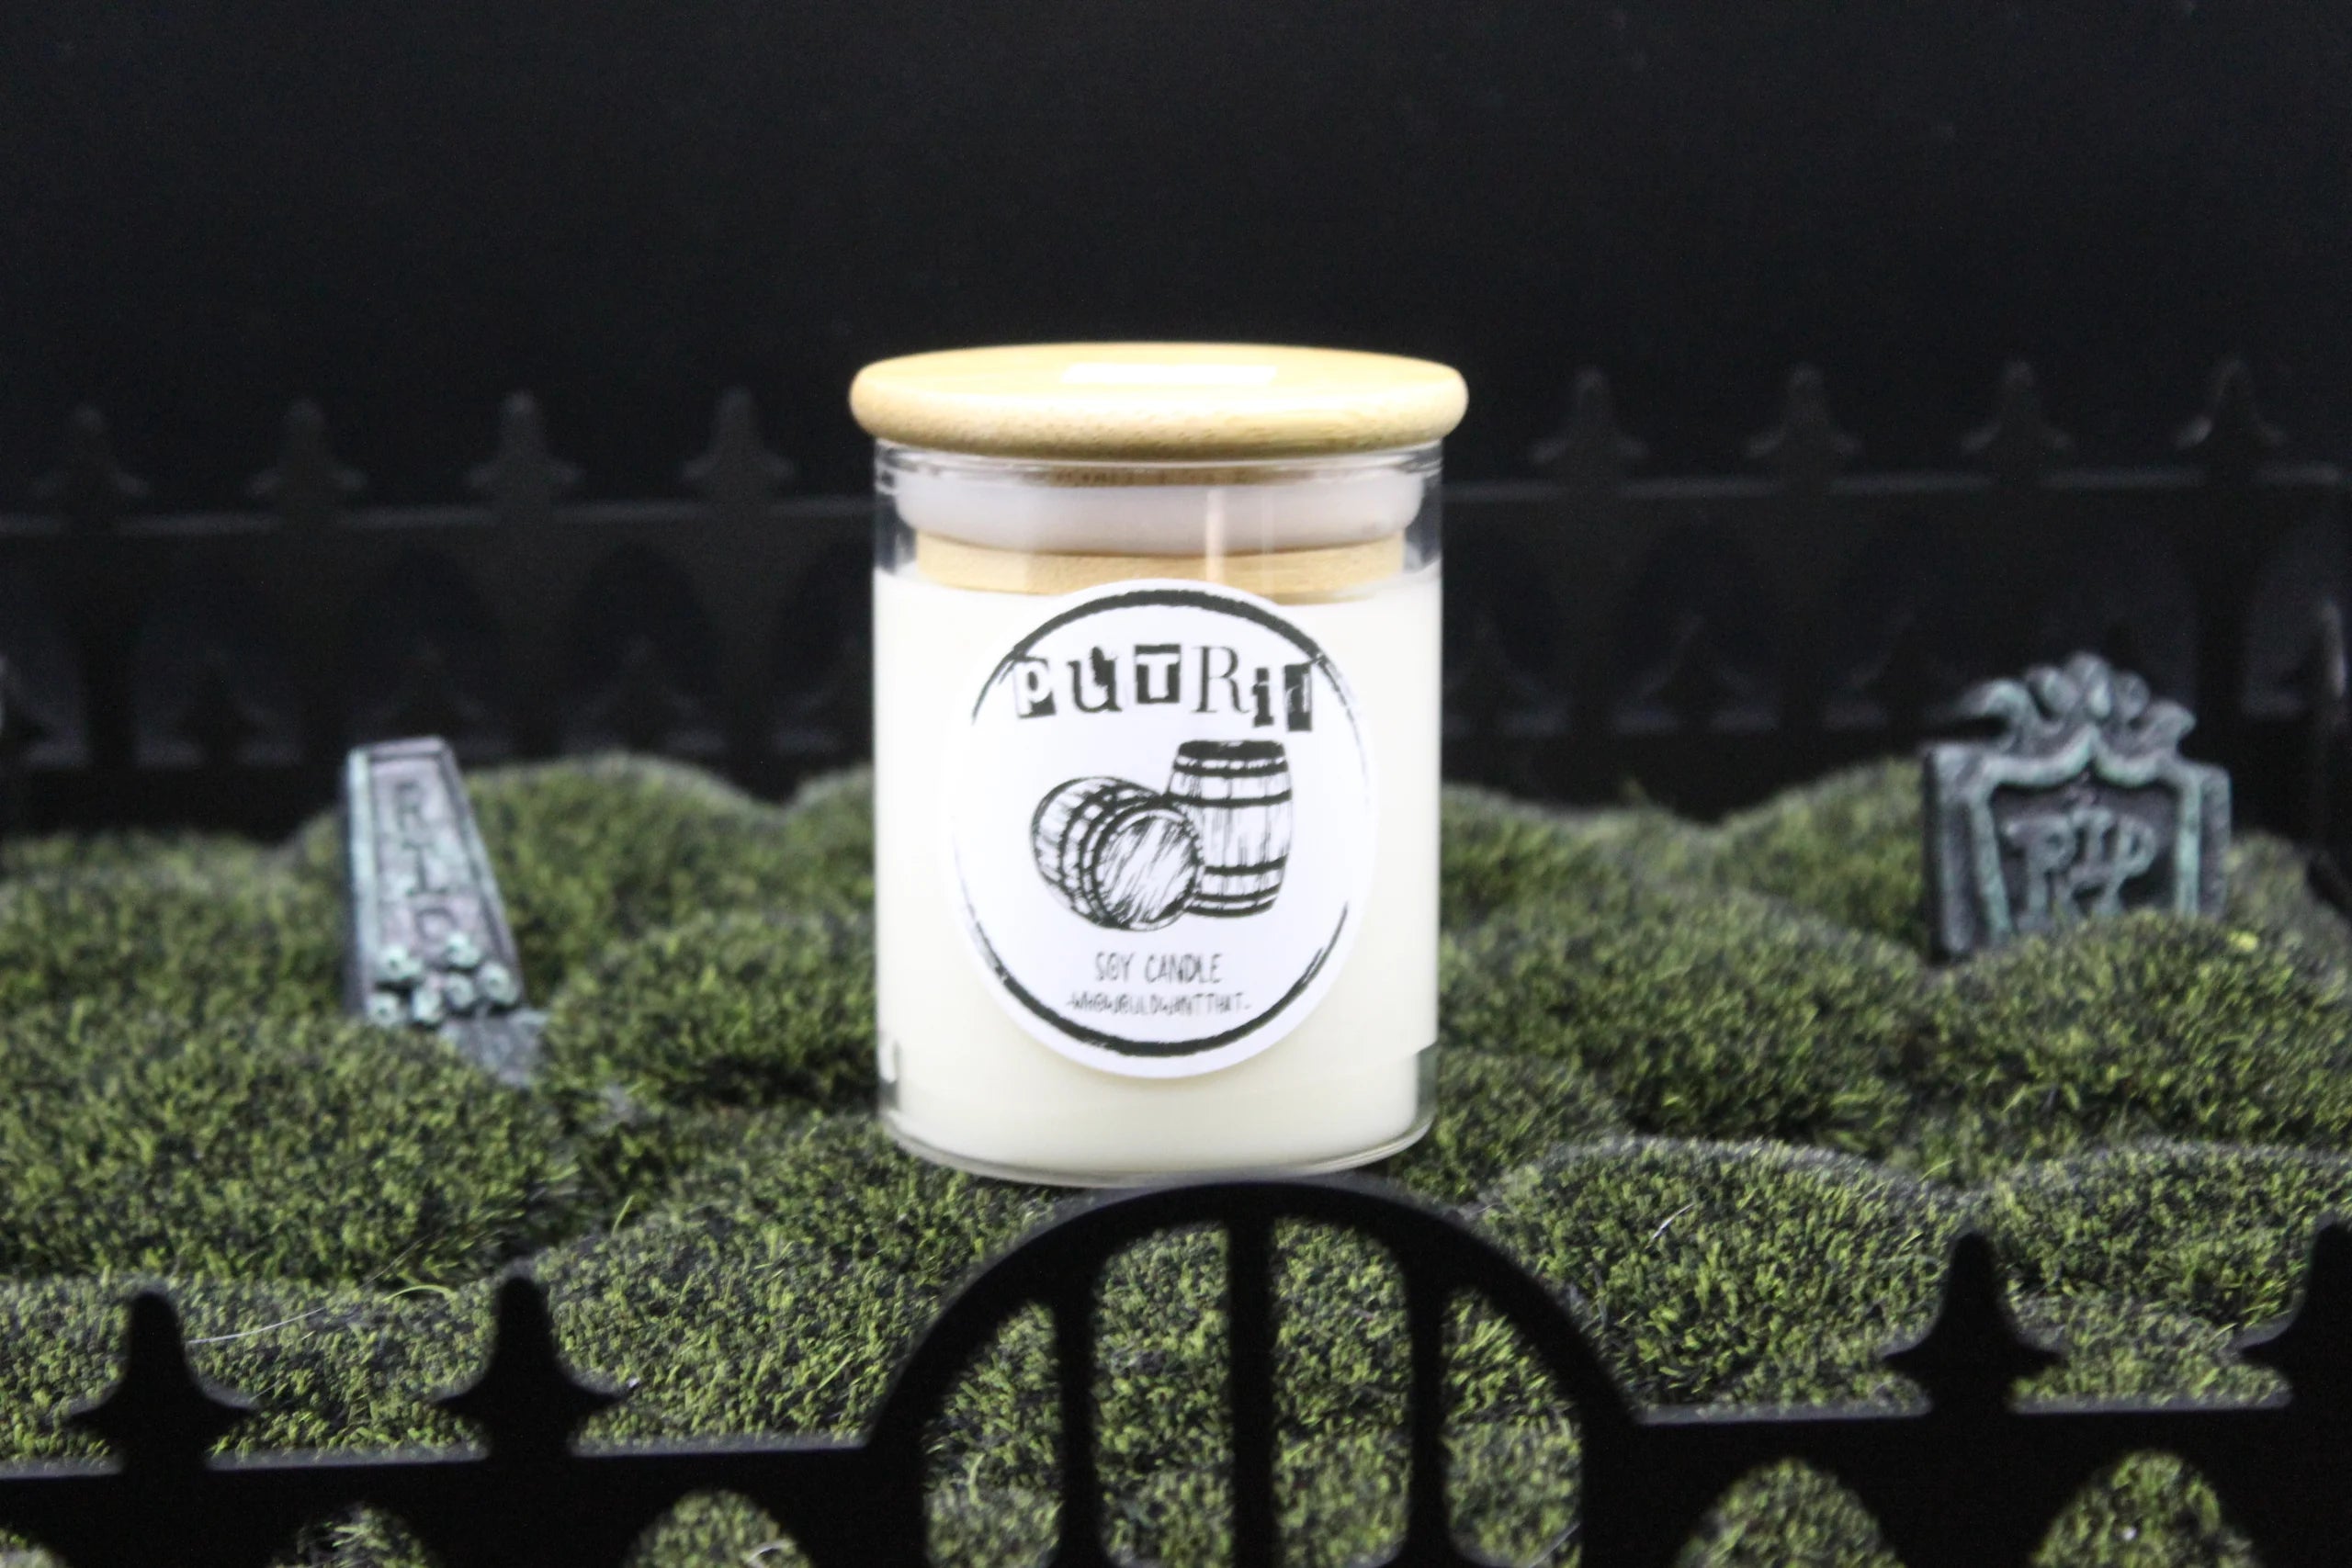 Putrid Candle - 8 oz Scented Soy Candle - Who Would Want That